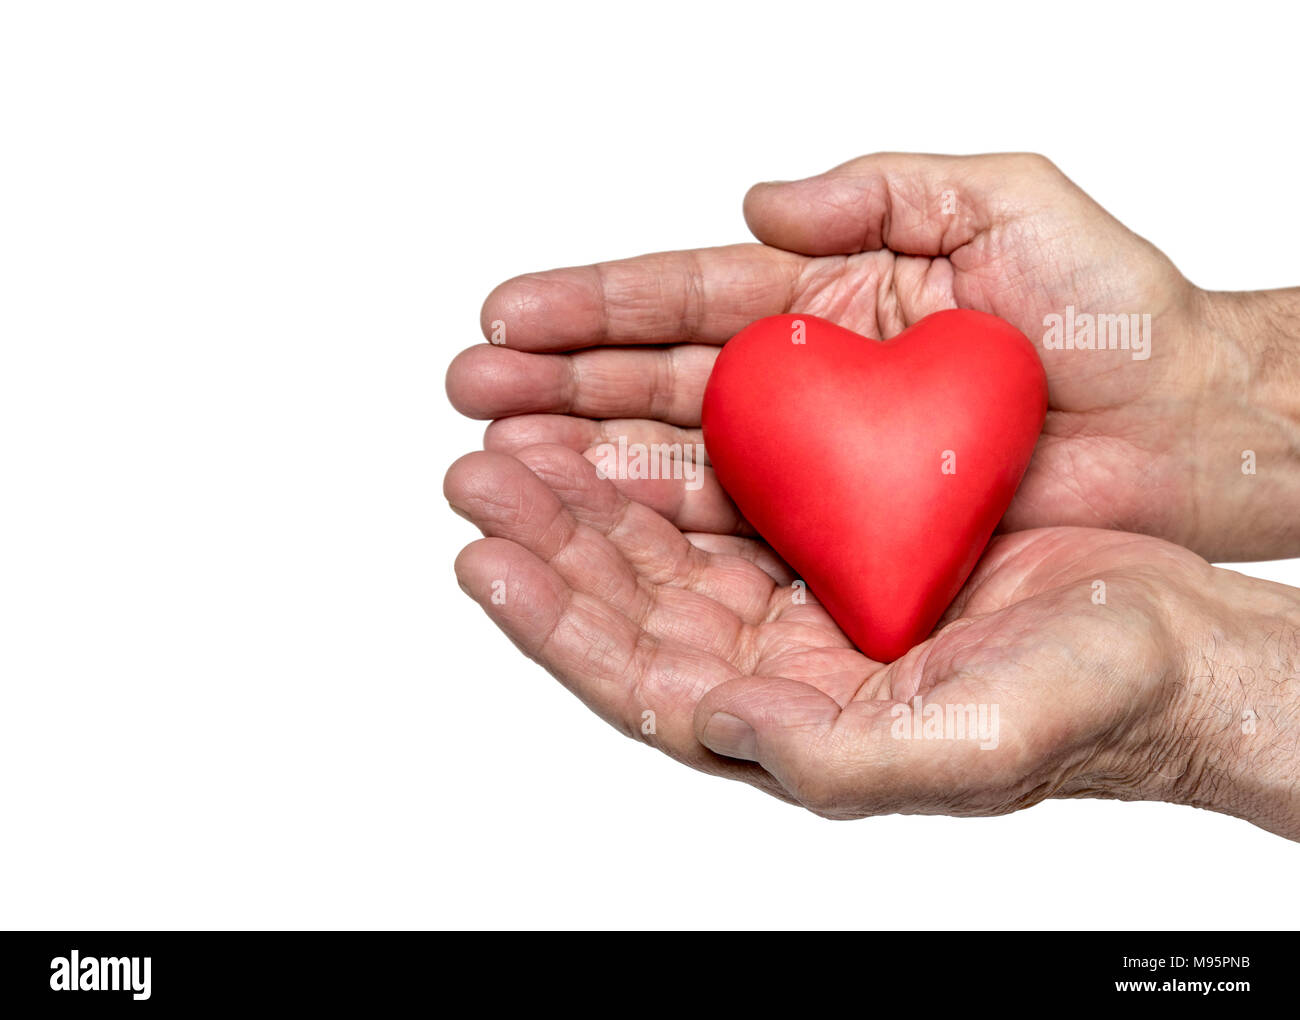 Old man's hands with red heart. Clipping path included. Stock Photo